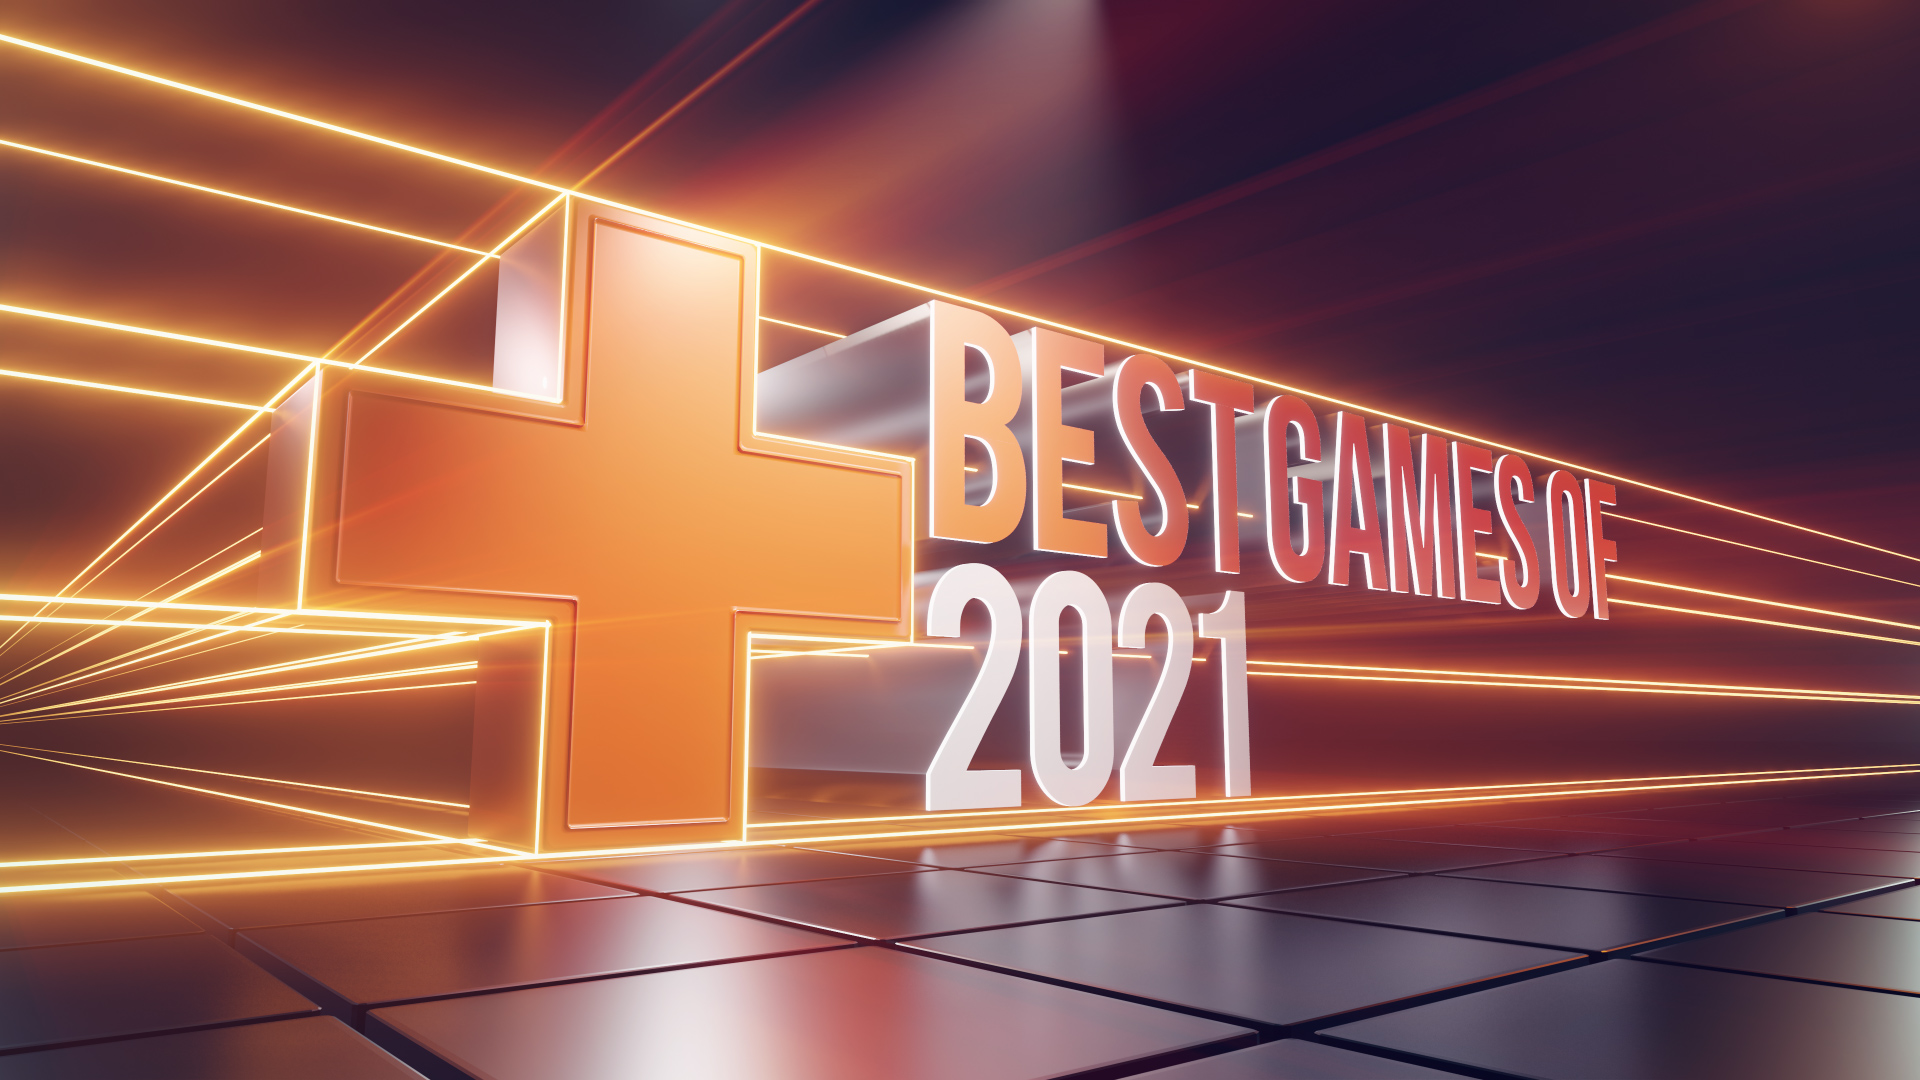 The top 10 best games of 2021 and GamesBeat's game of the year